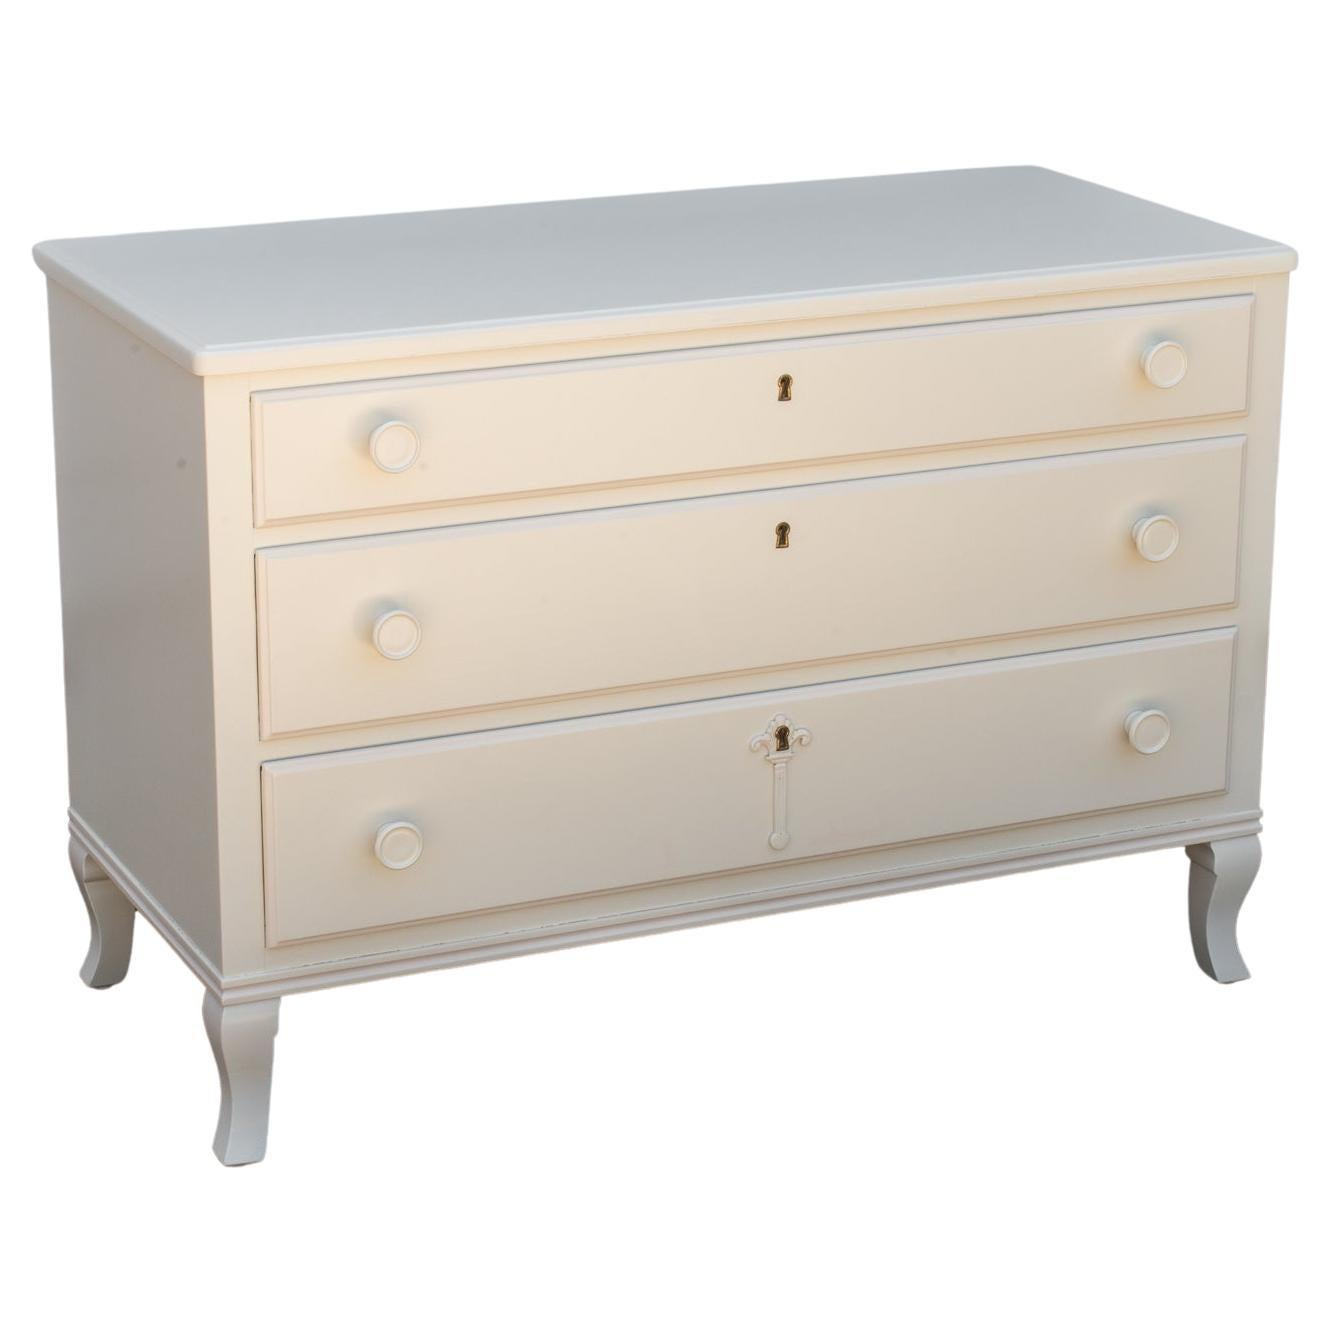 Swedish Art Moderne Chest of Drawers For Sale